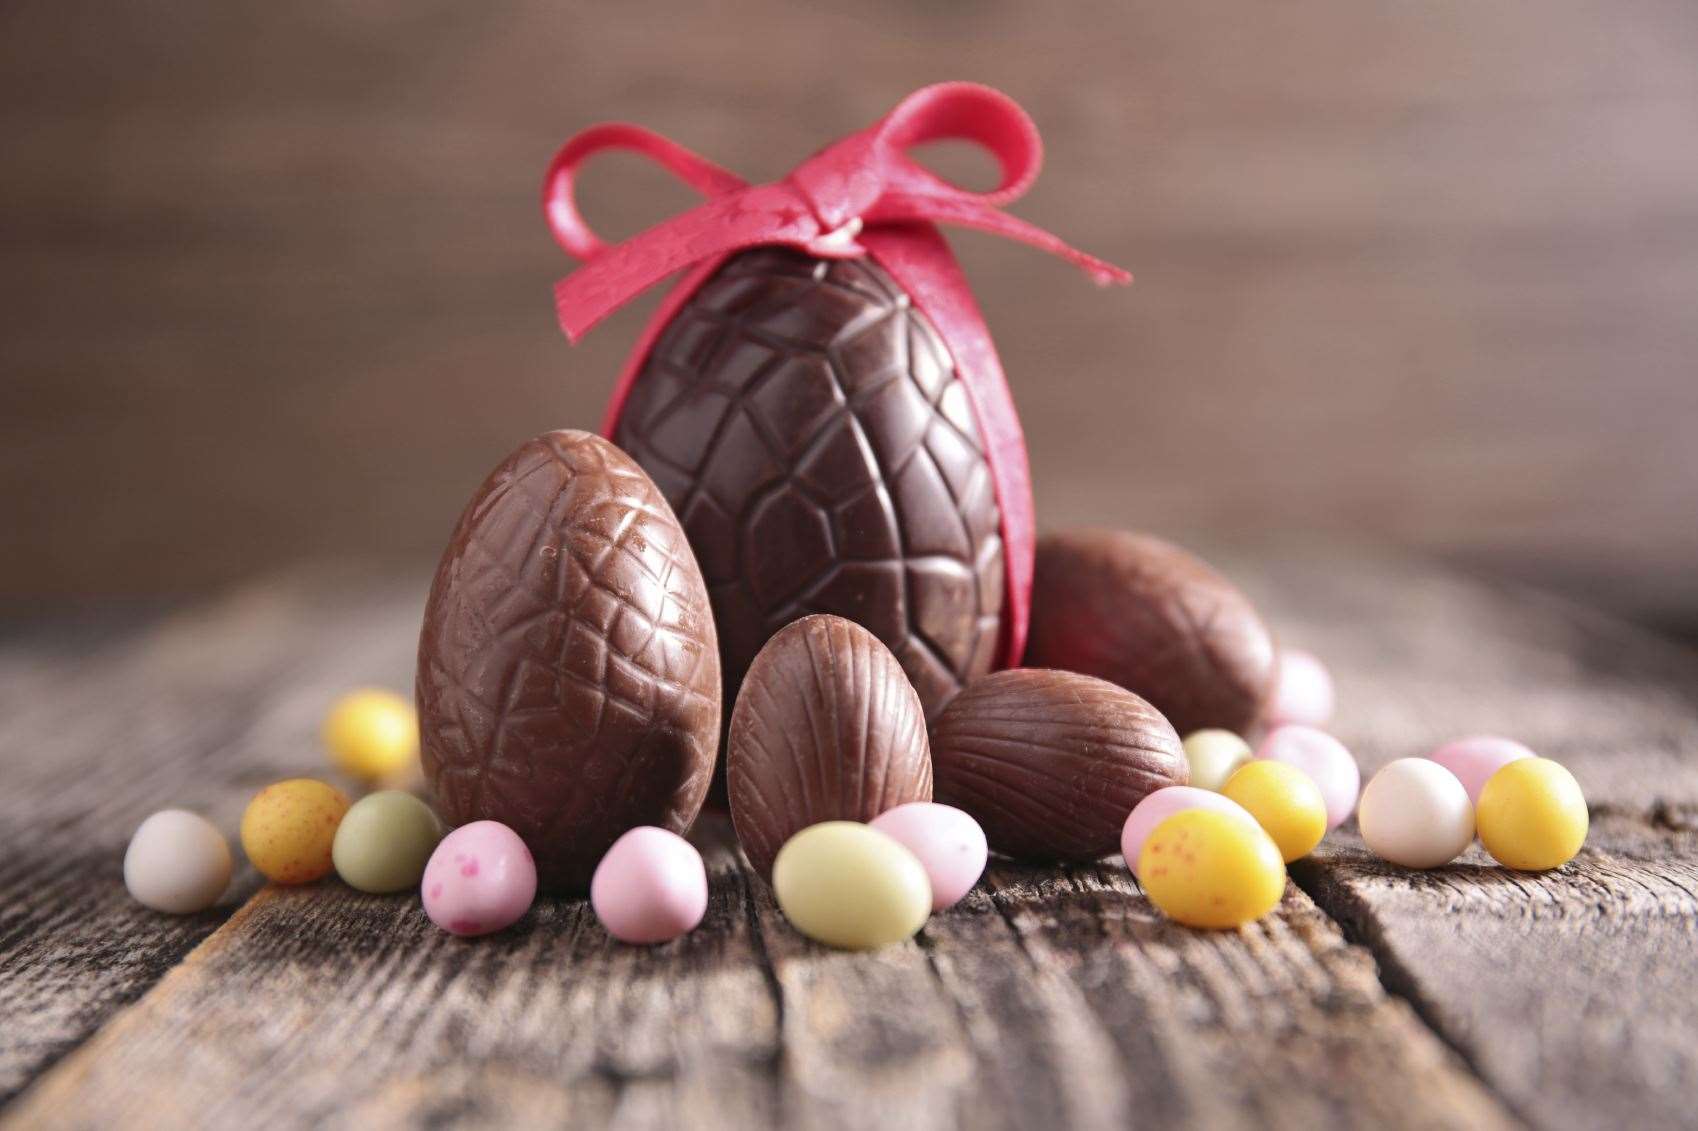 Why has this confectionary become linked to the Easter period?